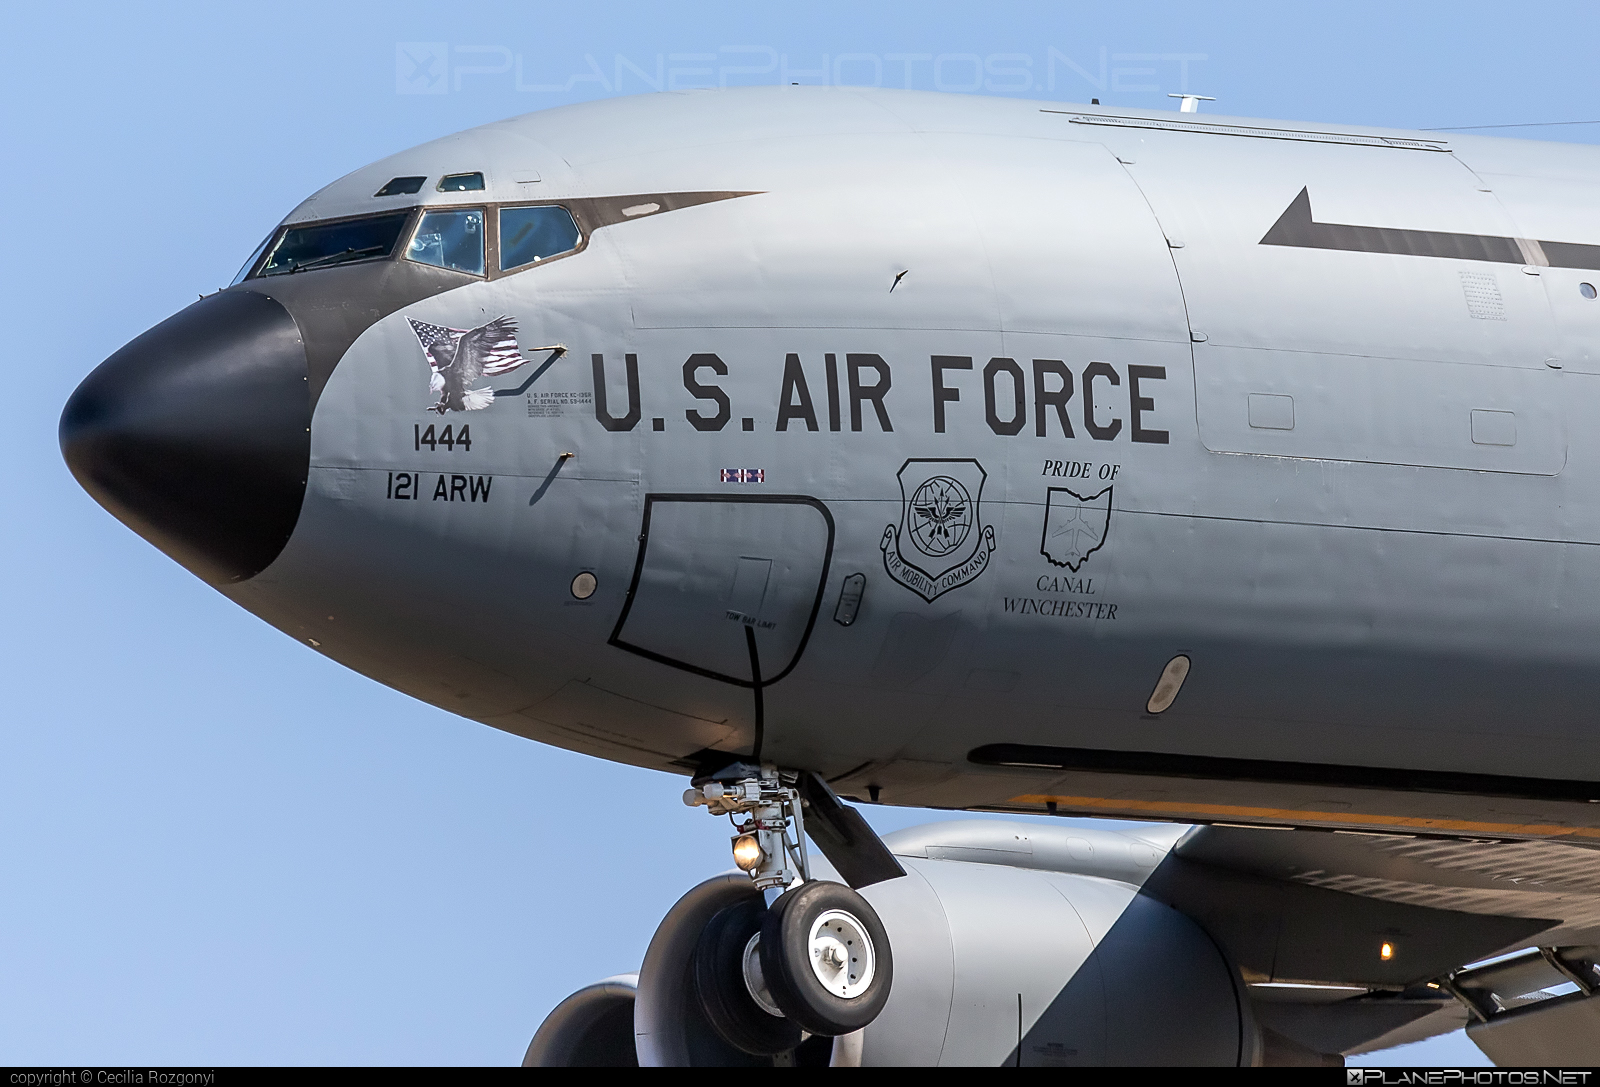 Boeing KC-135R Stratotanker - 59-1444 operated by US Air Force (USAF) #boeing #kc135 #kc135r #kc135stratotanker #stratotanker #usaf #usairforce